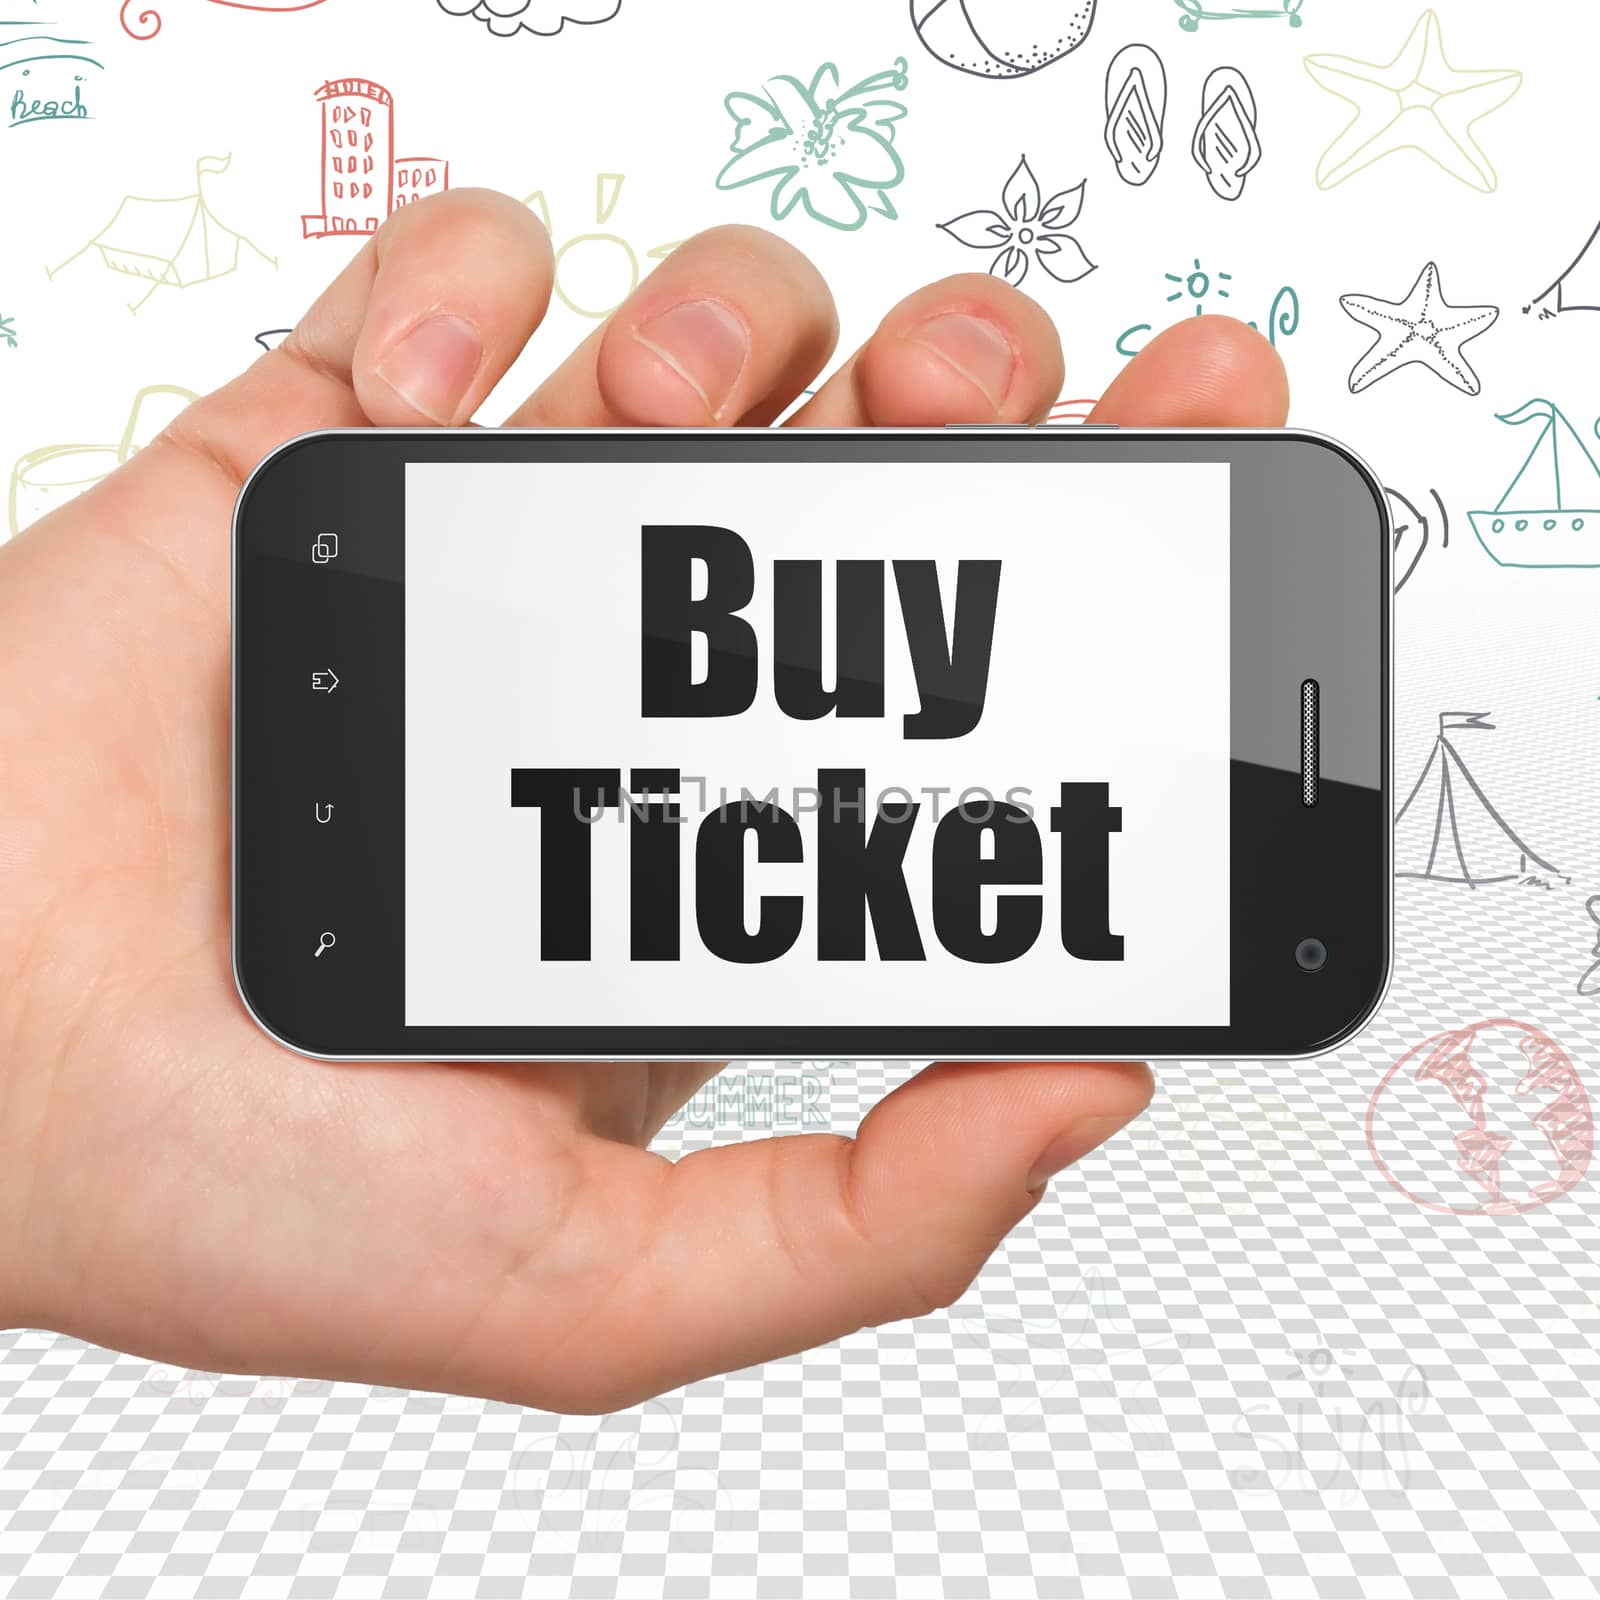 Vacation concept: Hand Holding Smartphone with  black text Buy Ticket on display,  Hand Drawn Vacation Icons background, 3D rendering